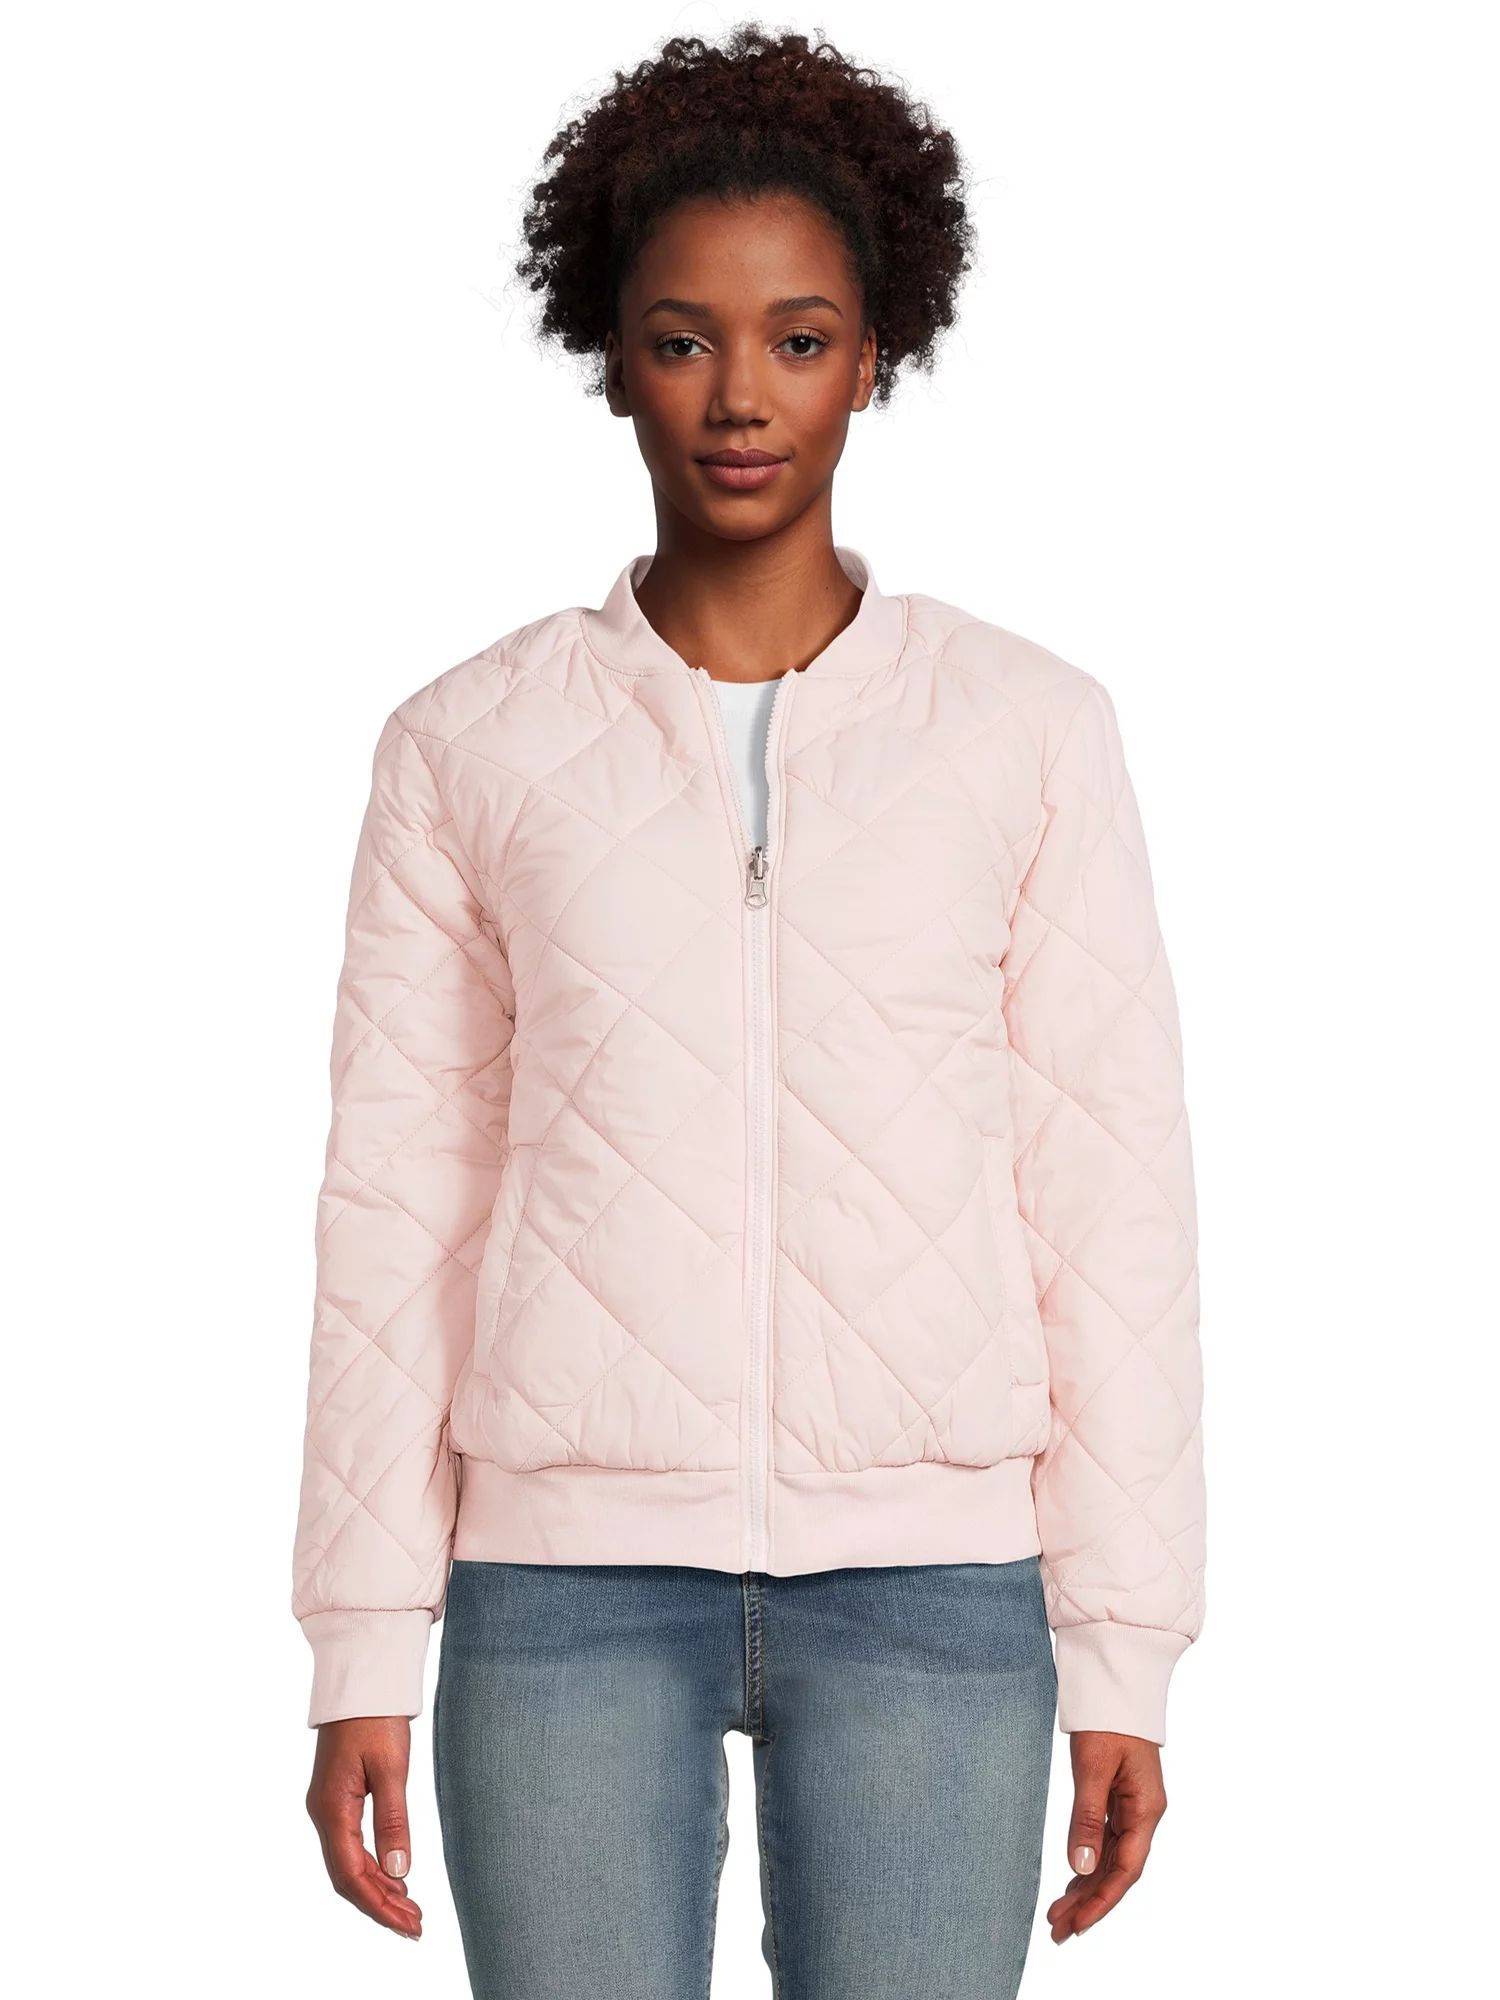 Alyned Together Women's Quilted Reversible Bomber Jacket, Sizes S-3X | Walmart (US)